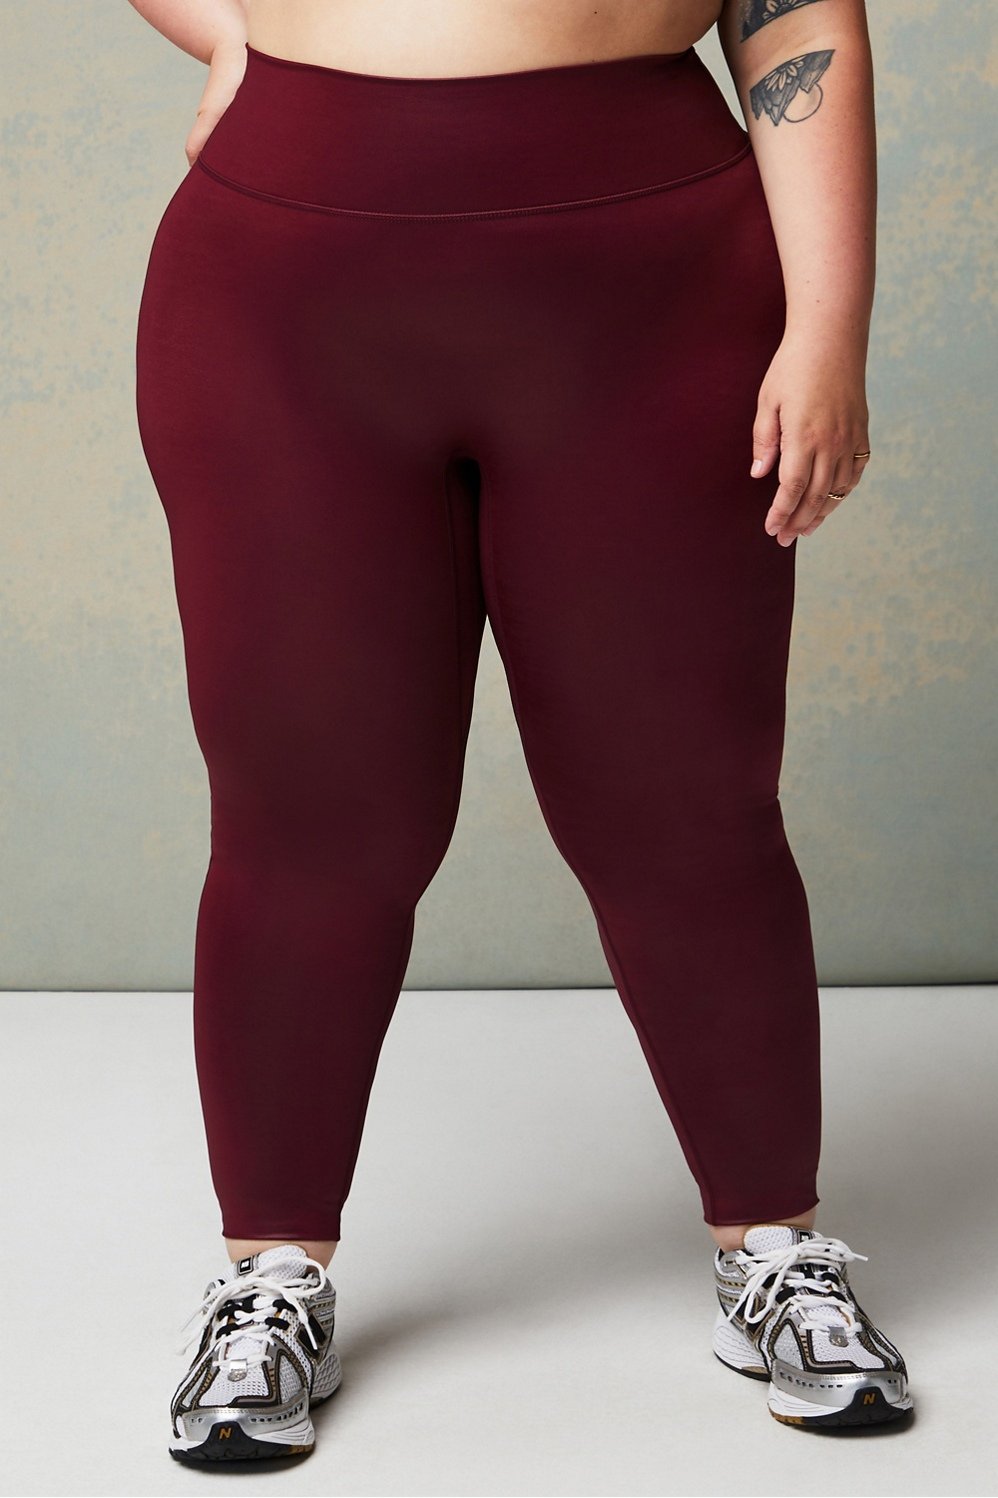 Mossimo Supply Co. Burgundy Leggings Size L - 23% off